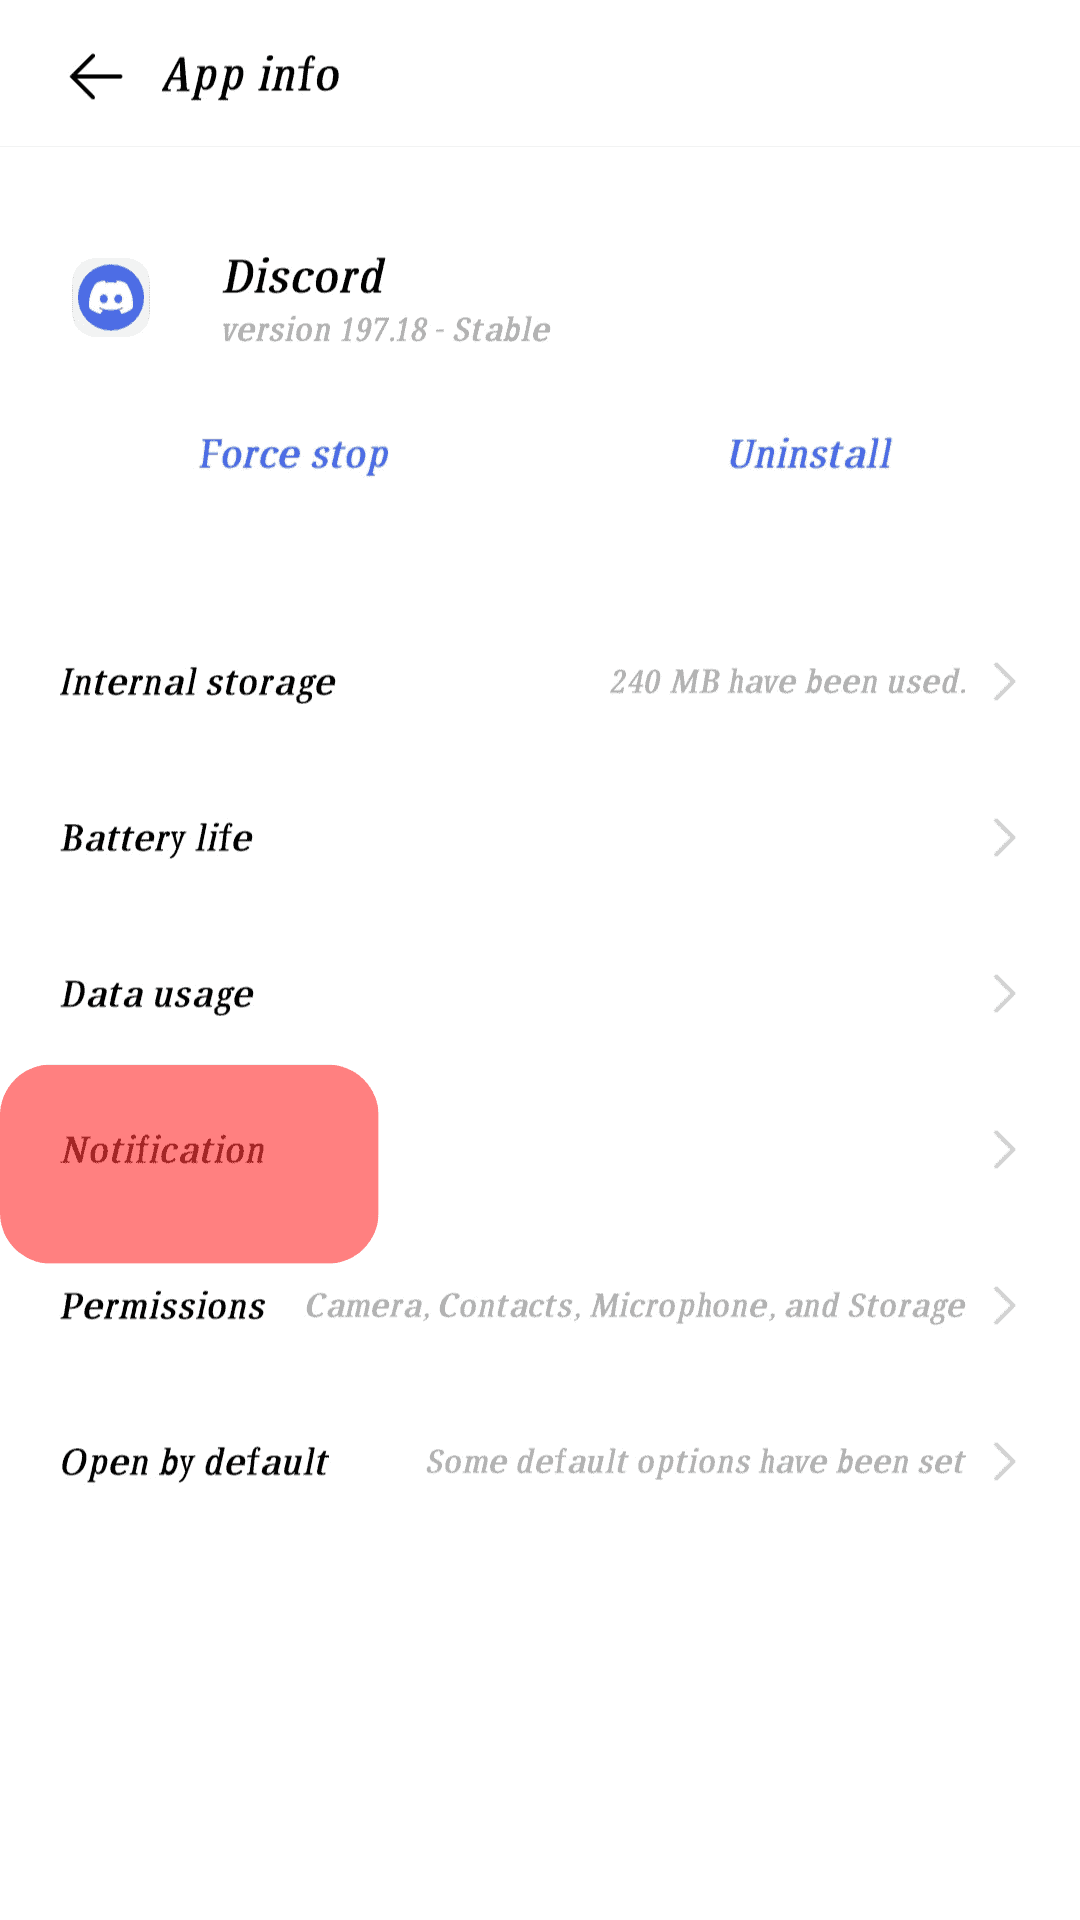 Choose The Notifications Option.